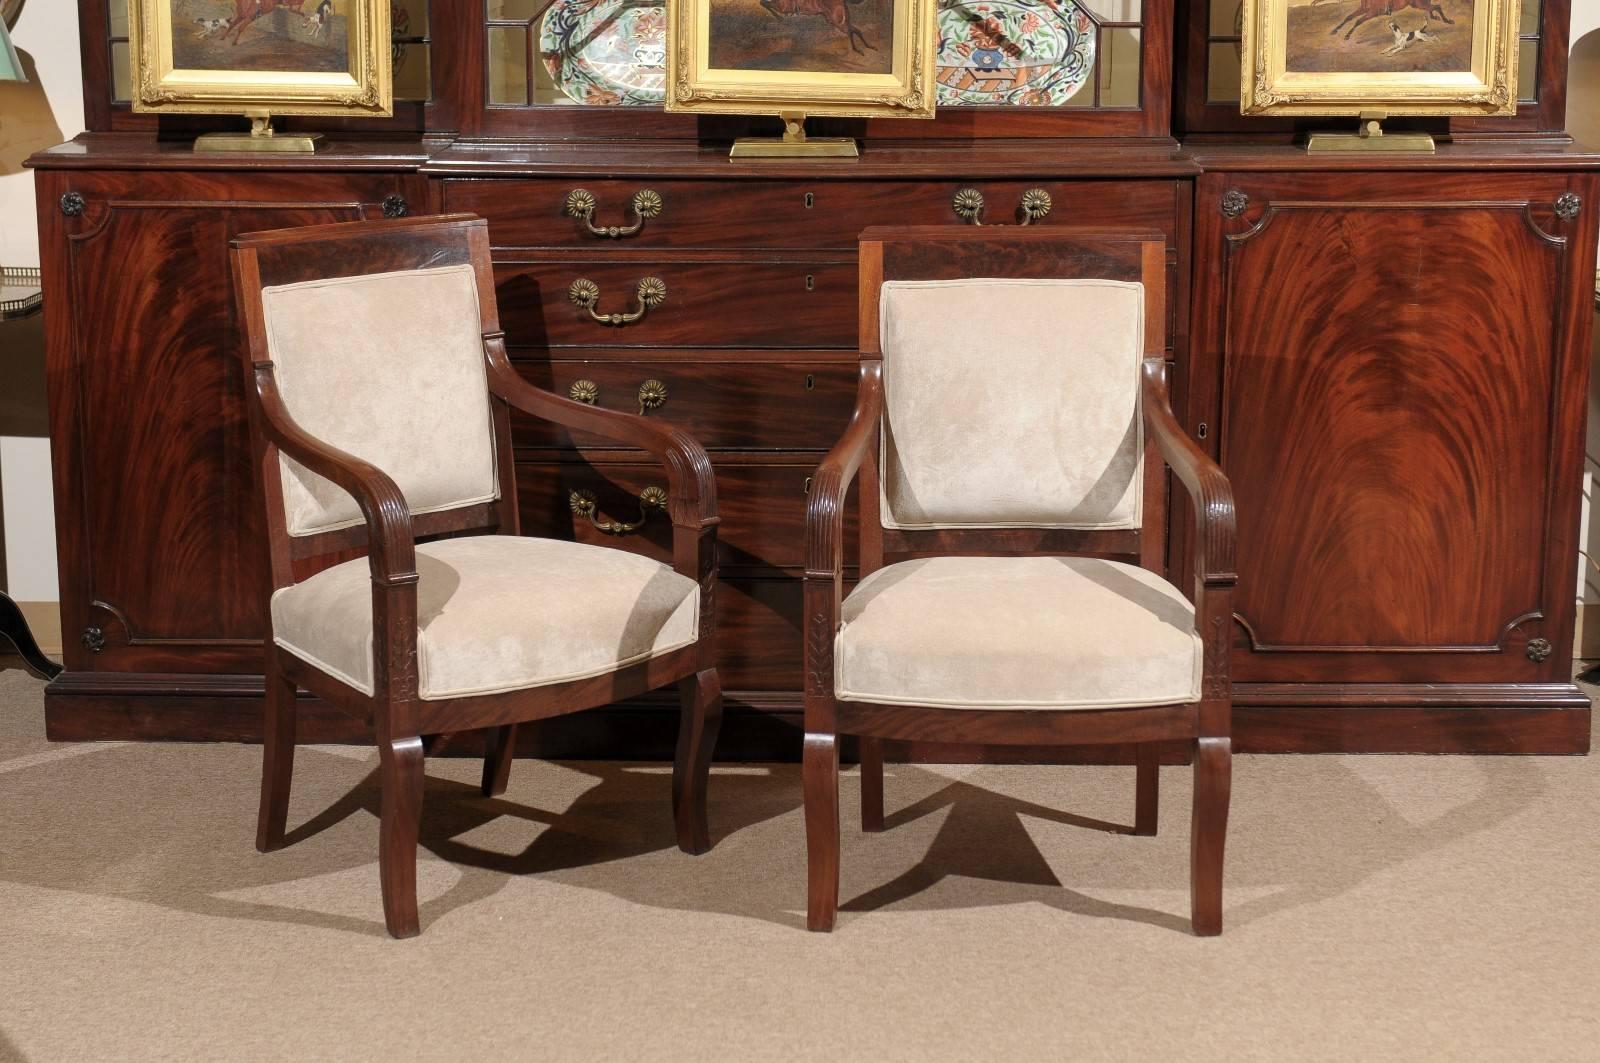 Pair of French Empire Mahogany Fauteuils, 19th Century, circa 1810 In Good Condition For Sale In Atlanta, GA